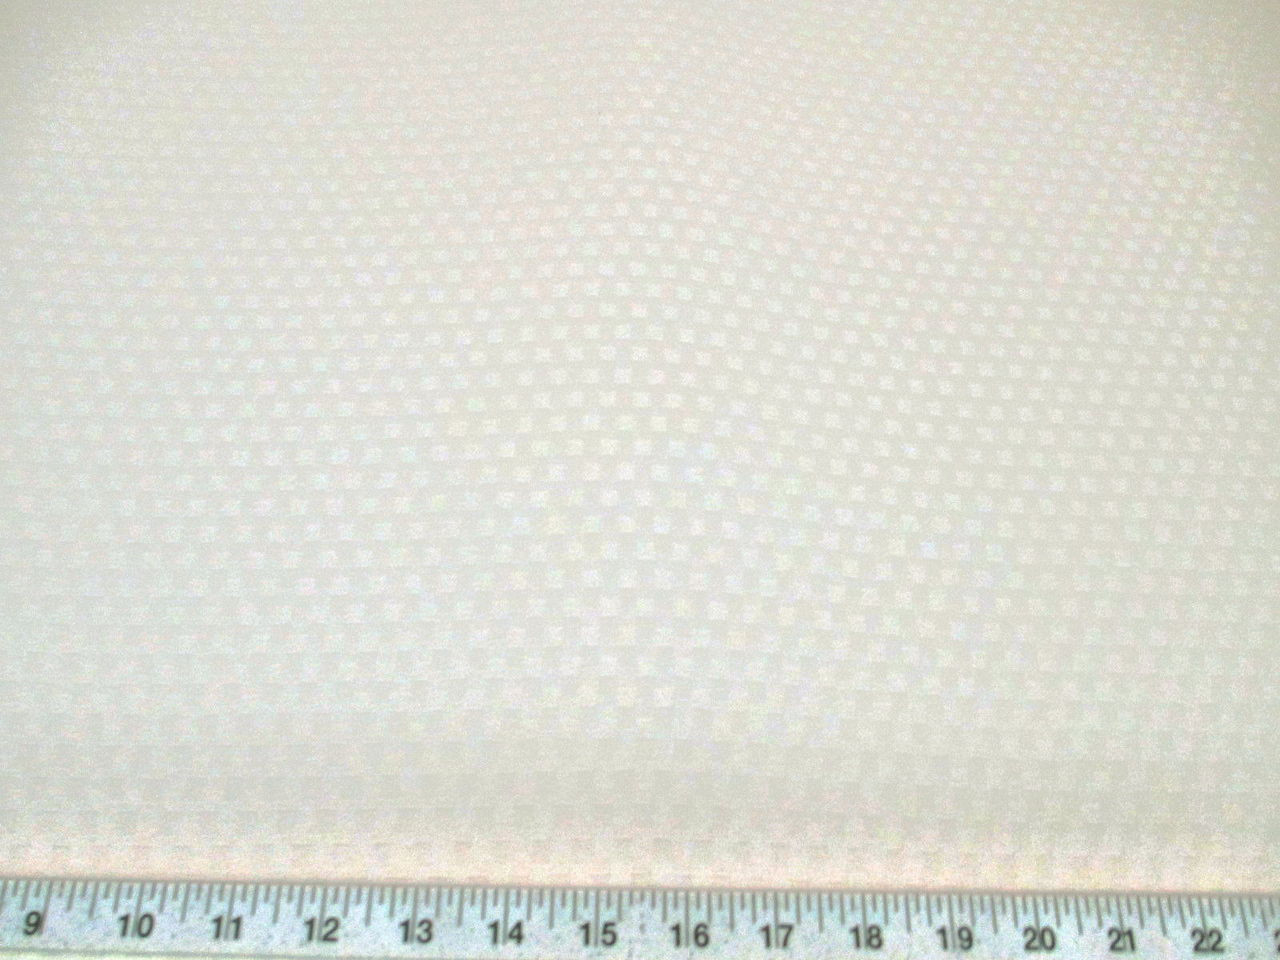 Discount Tablecloth Fabric Jacquard Check Eggshell White DR42